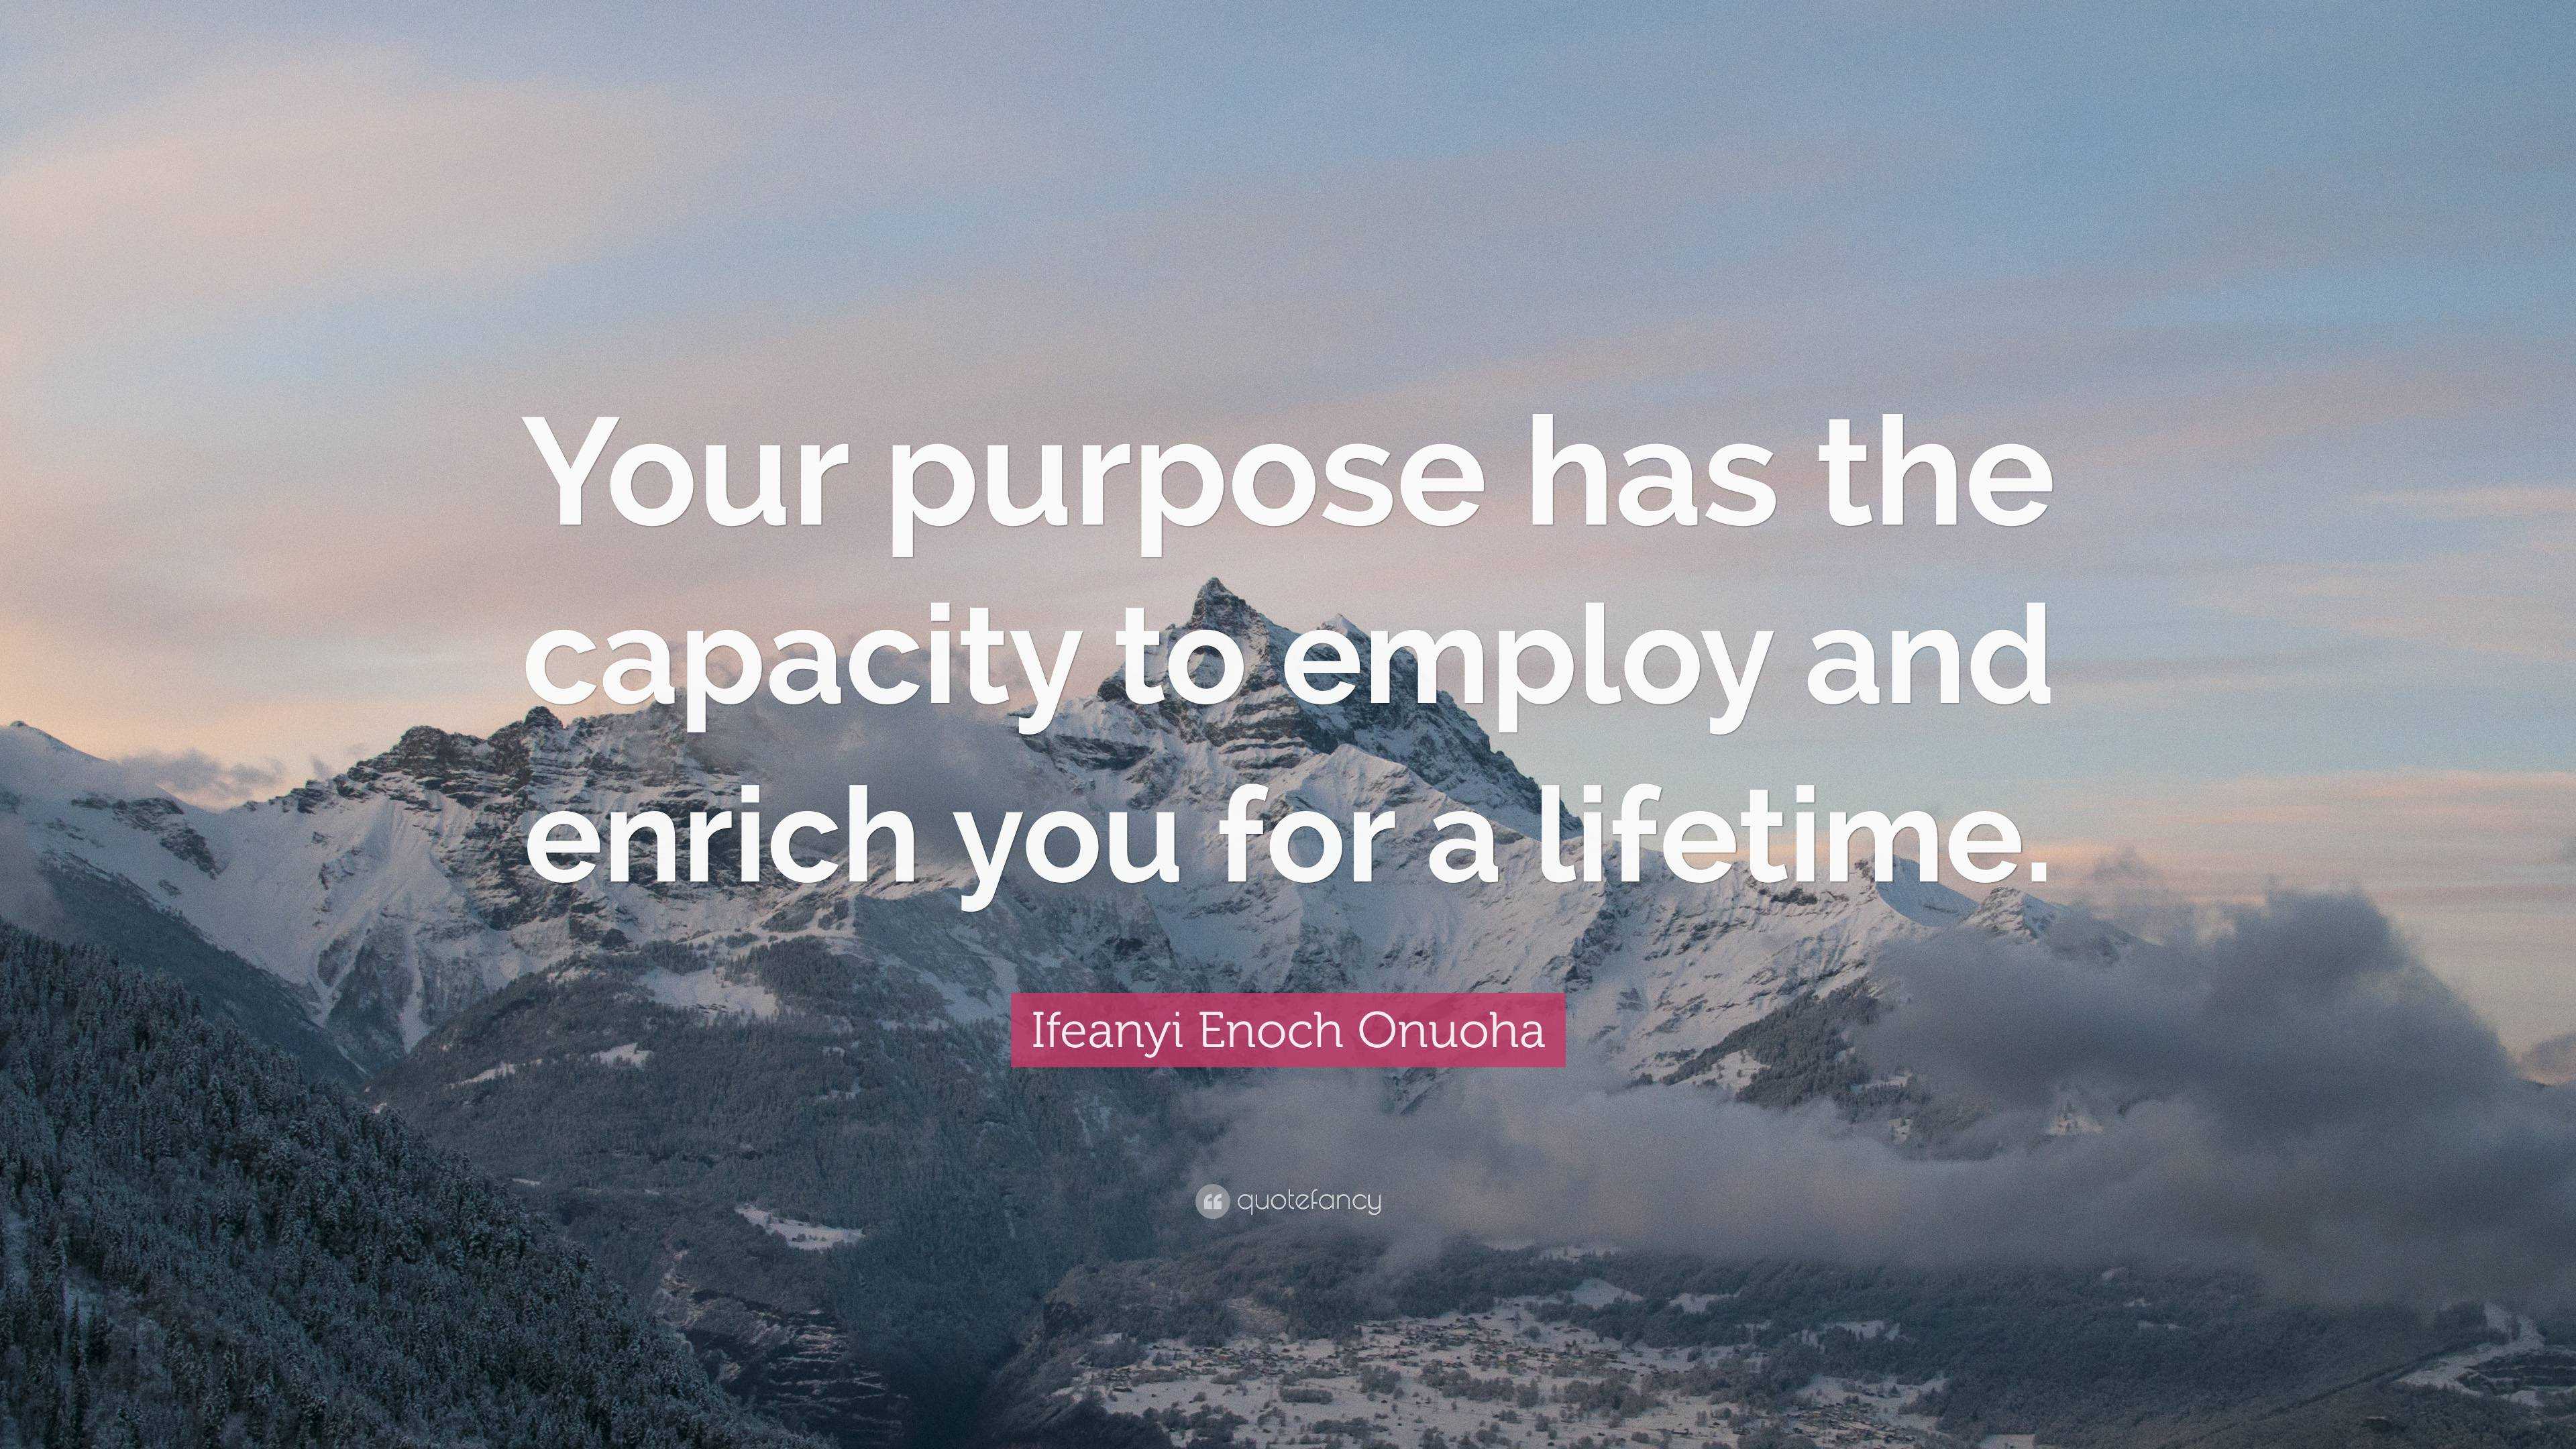 Ifeanyi Enoch Onuoha Quote: “Your purpose has the capacity to employ ...